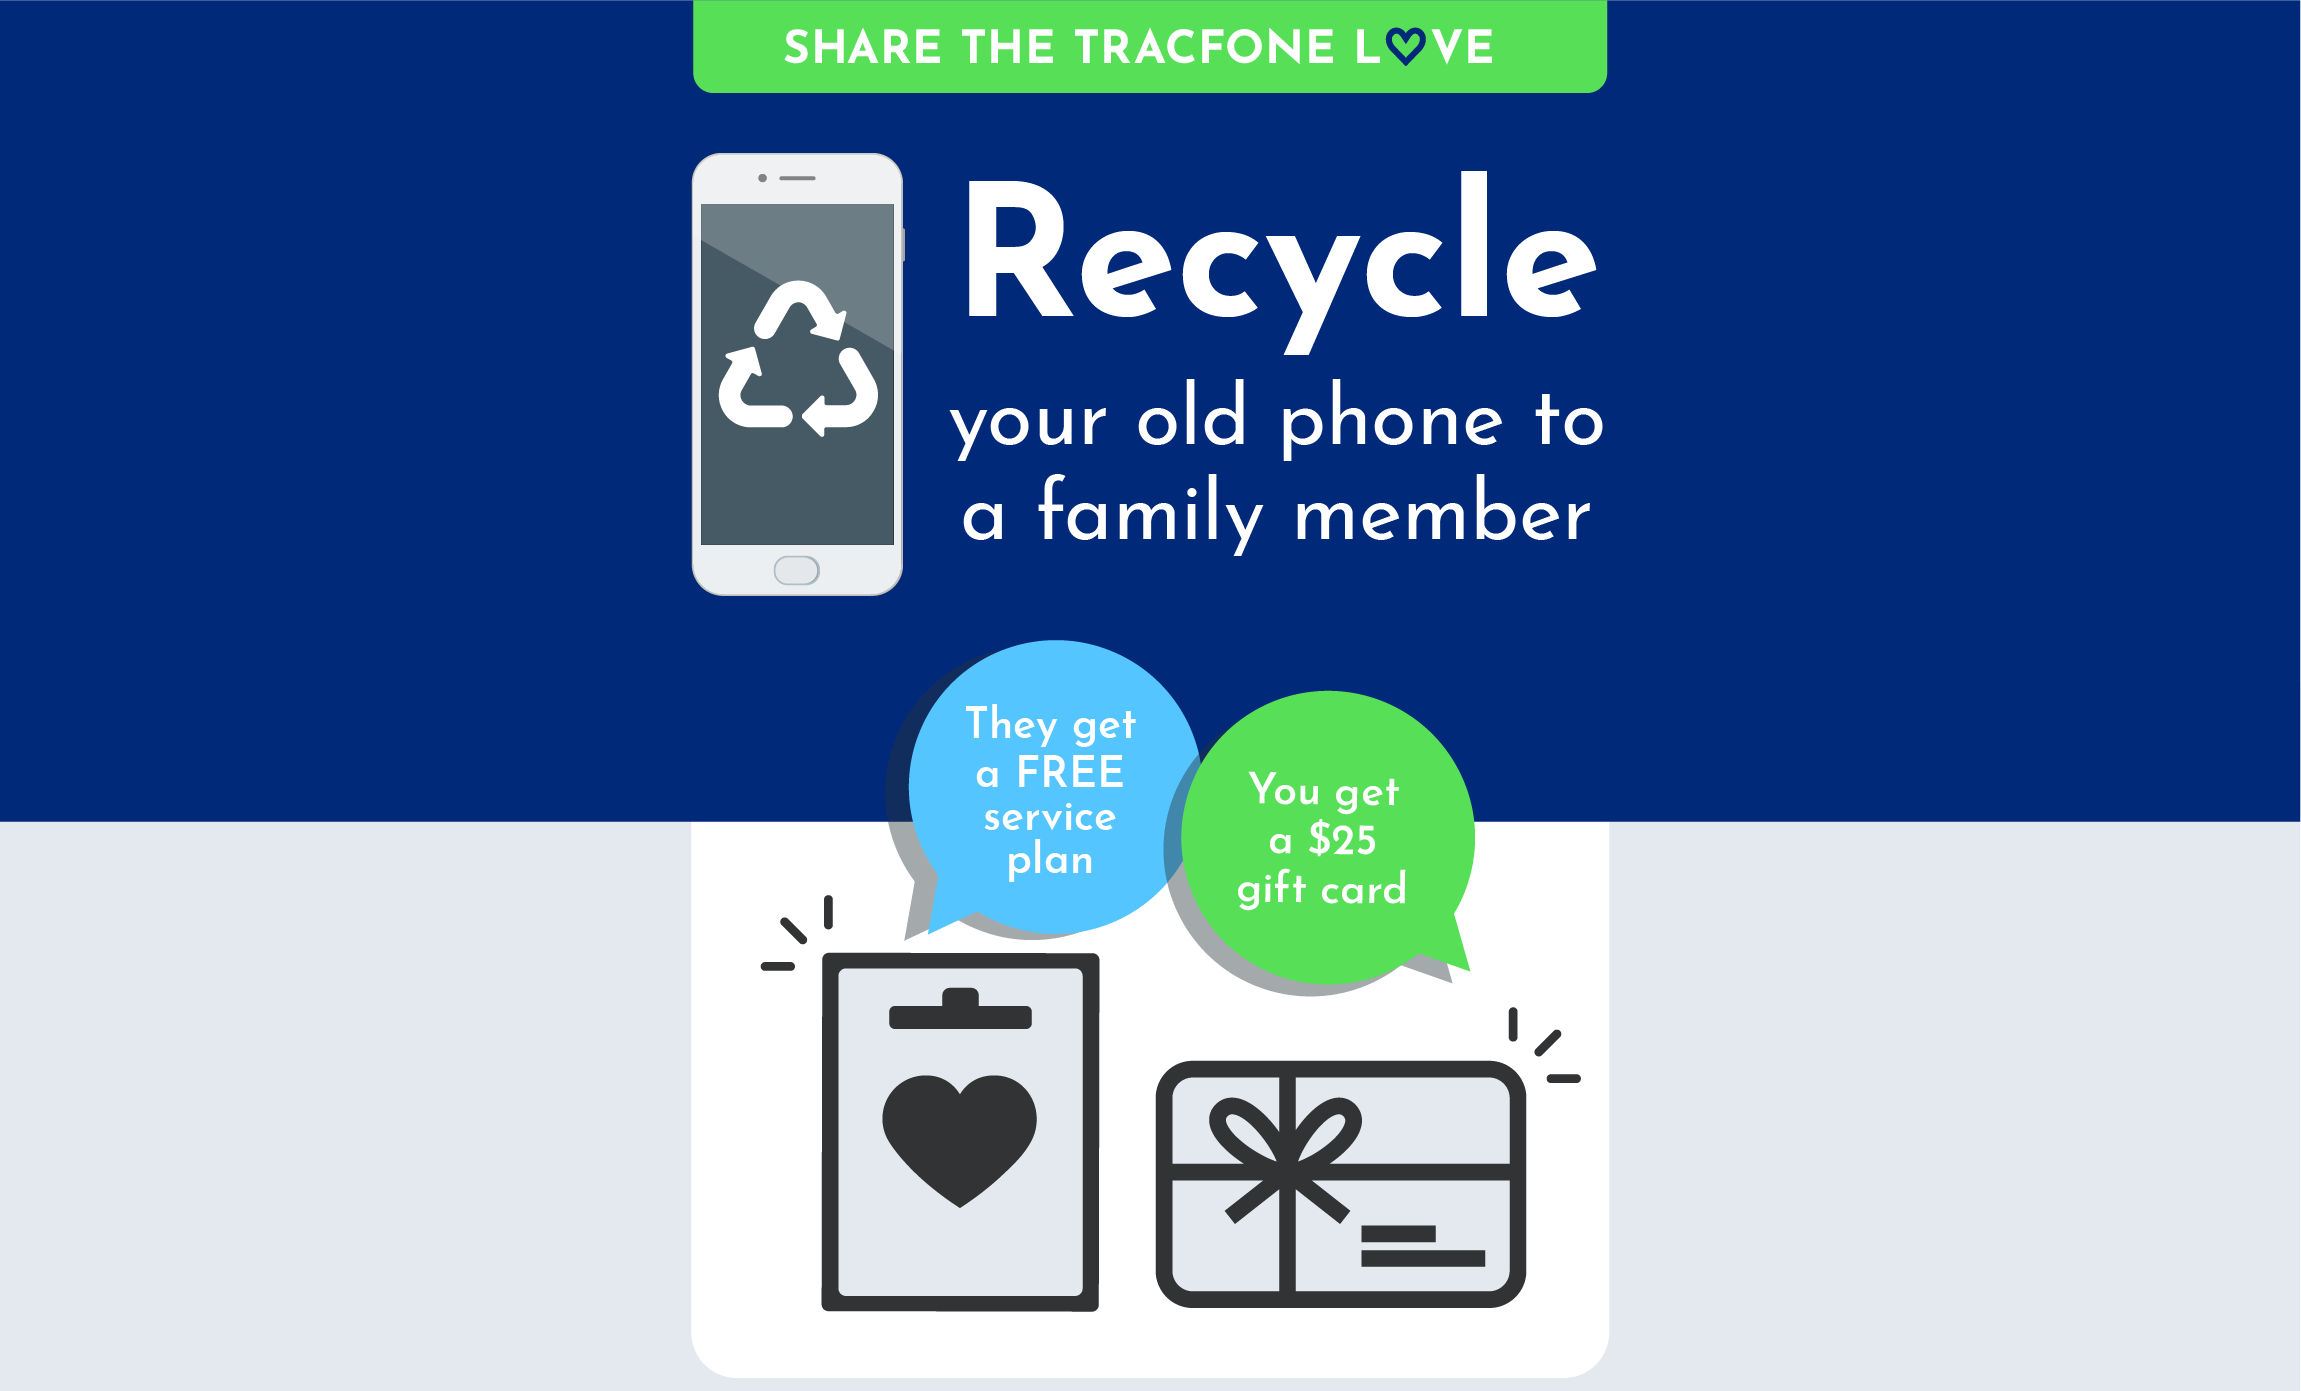 SHARE THE TRACFONE LOVE